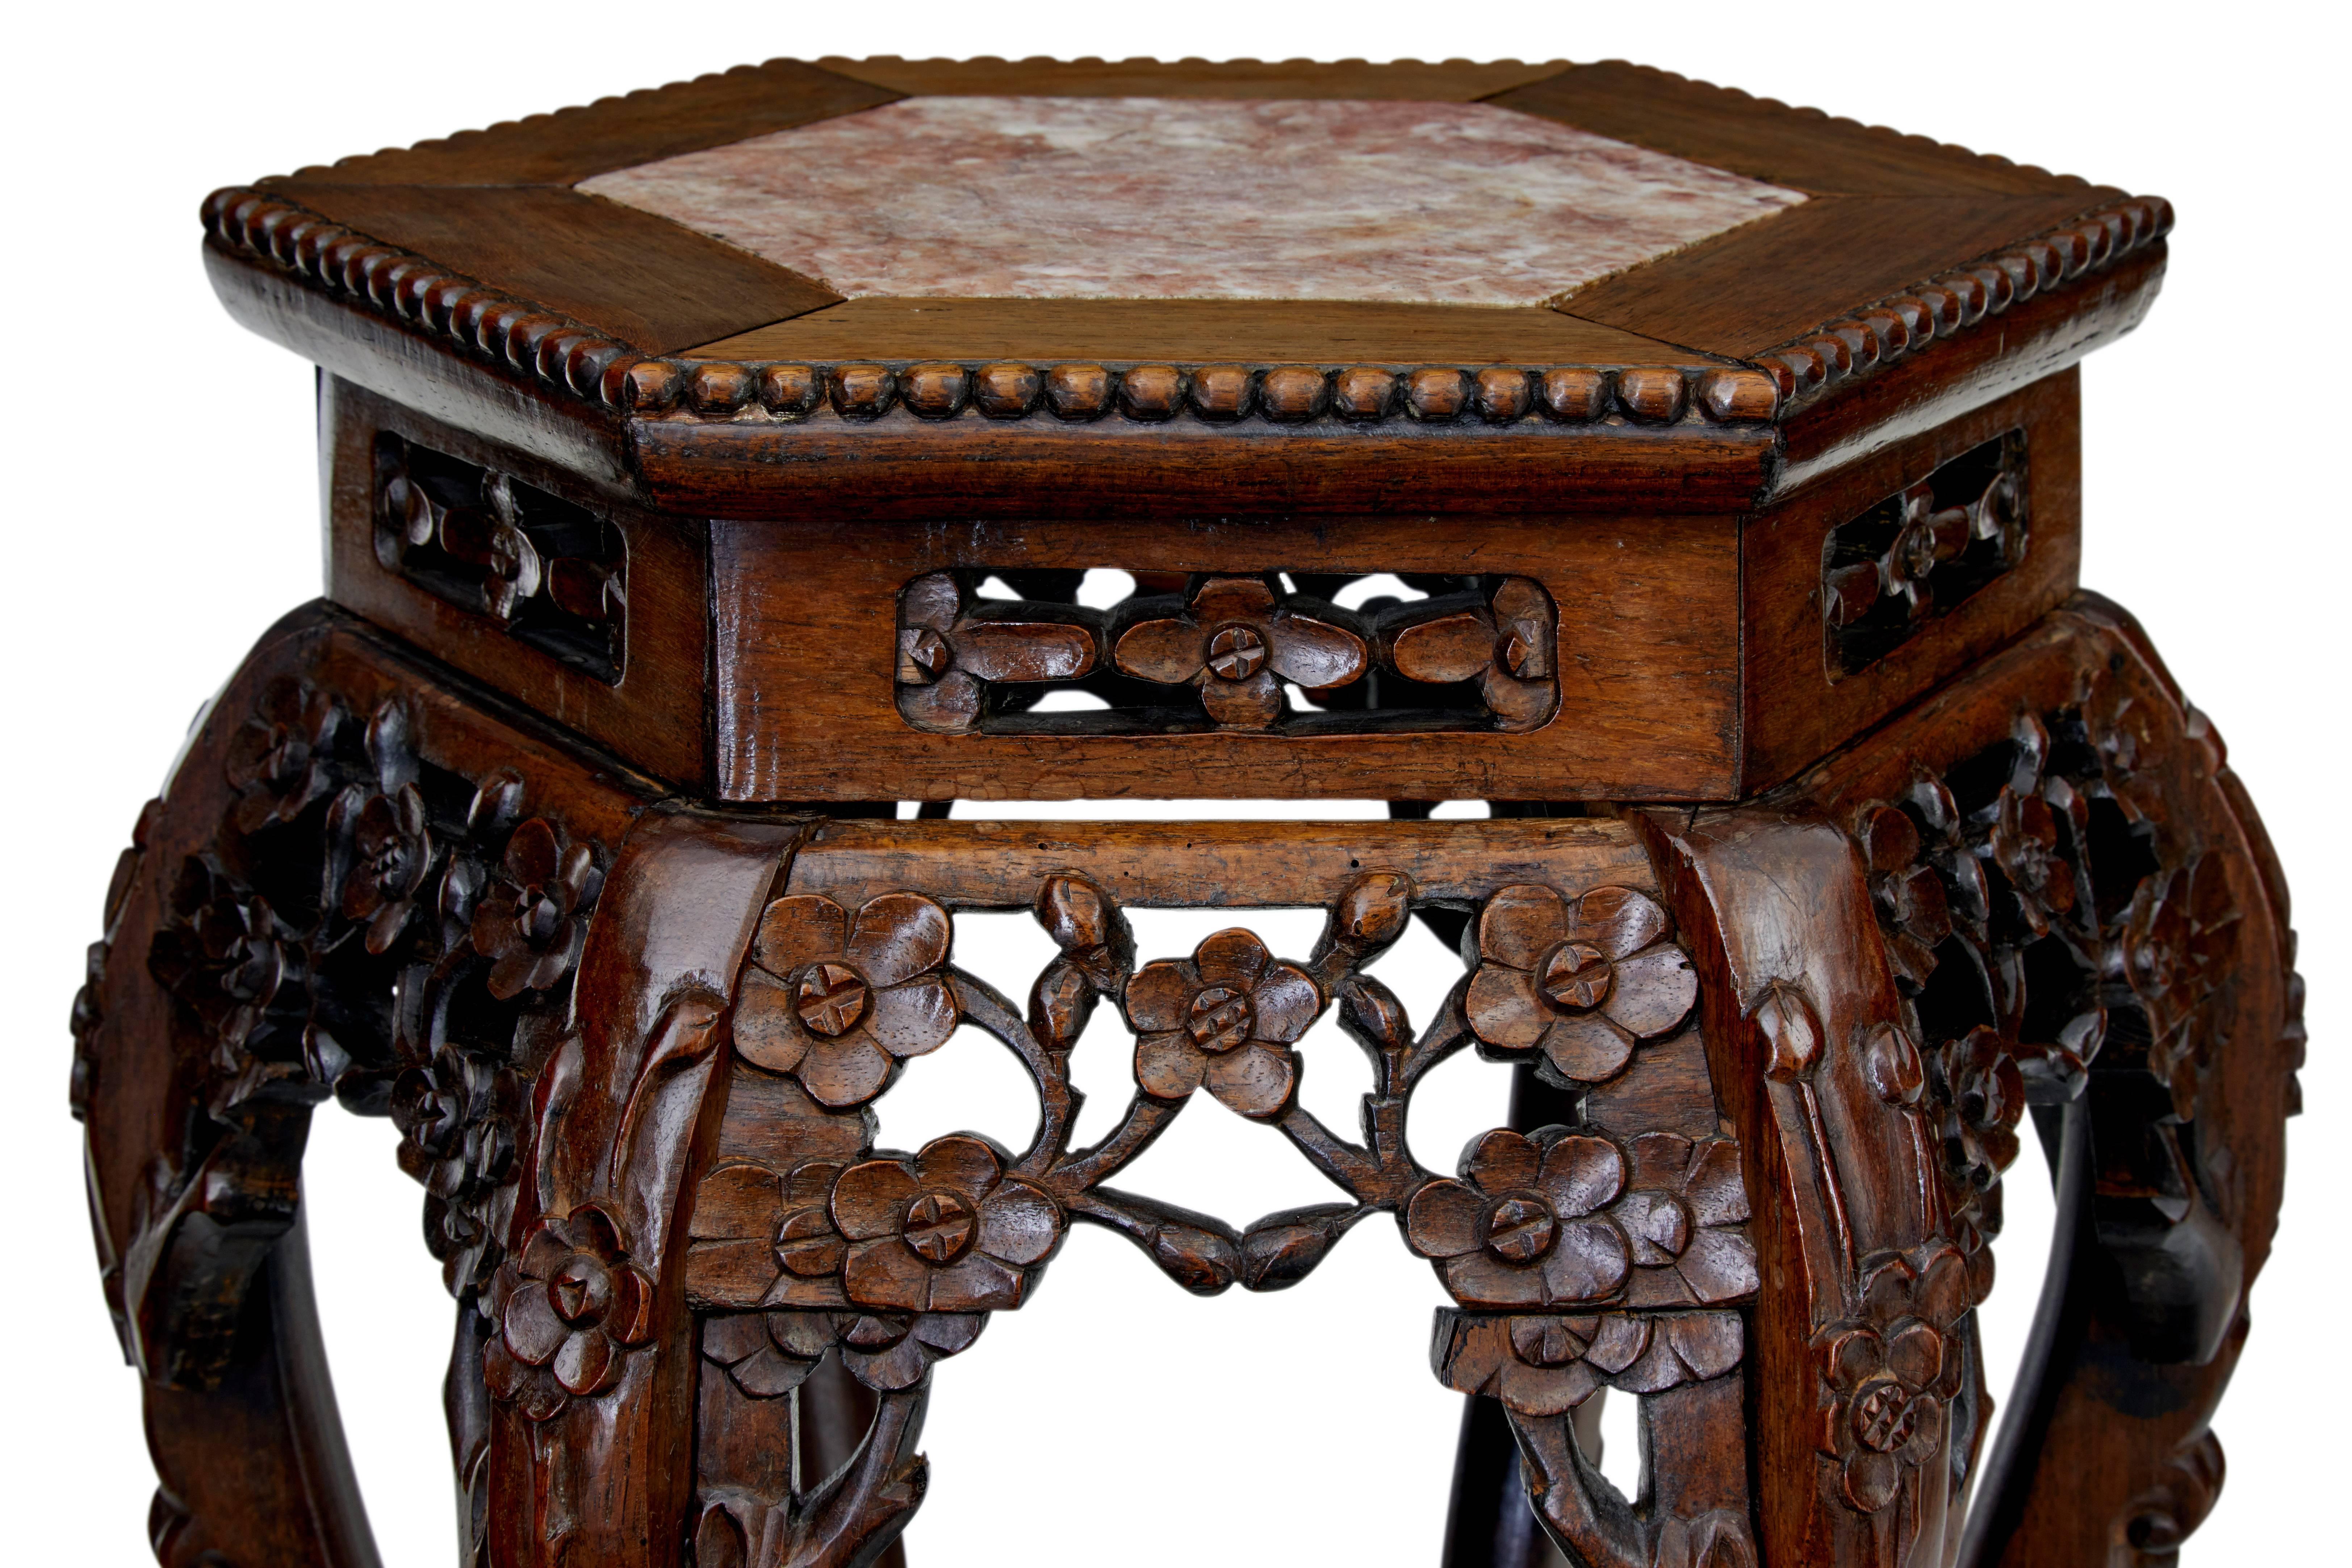 Chinese Export 19th Century Carved Hard Wood Chinese Jardinere Stand